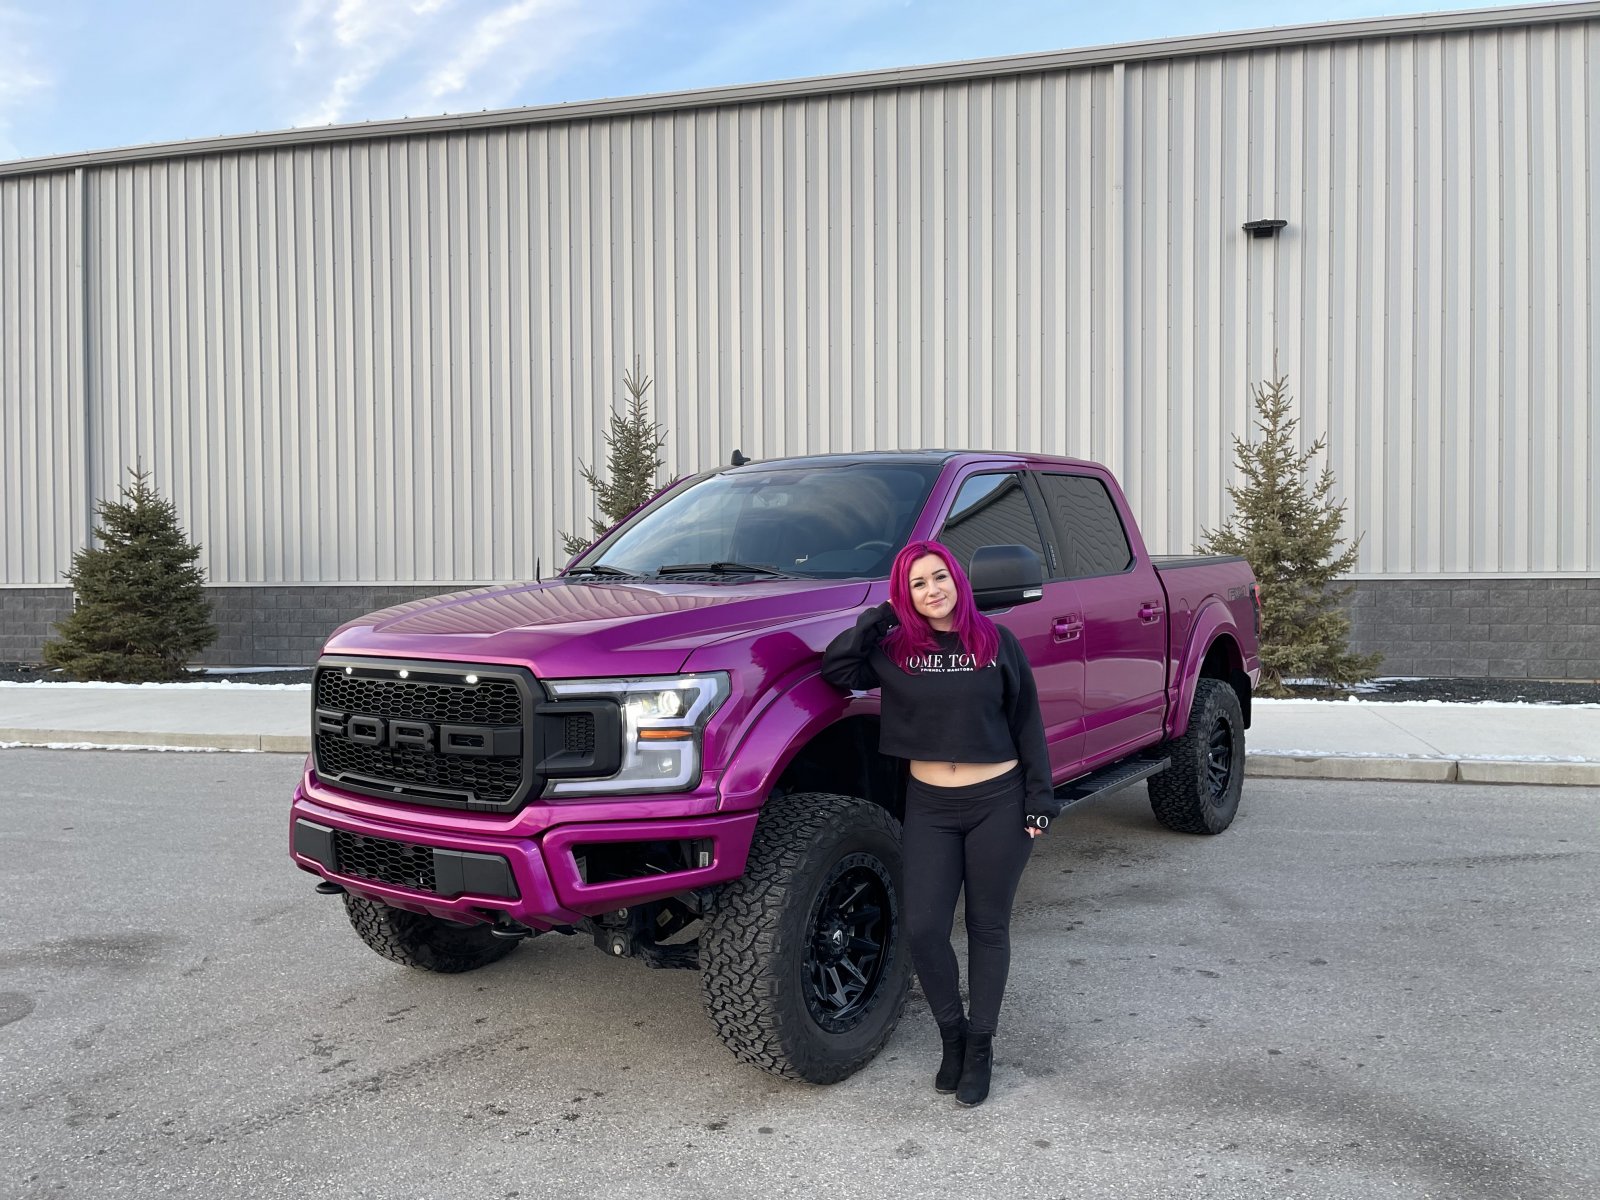 2020 Ford F150 Lifted FX4 With Unique Color | Ford Daily Trucks